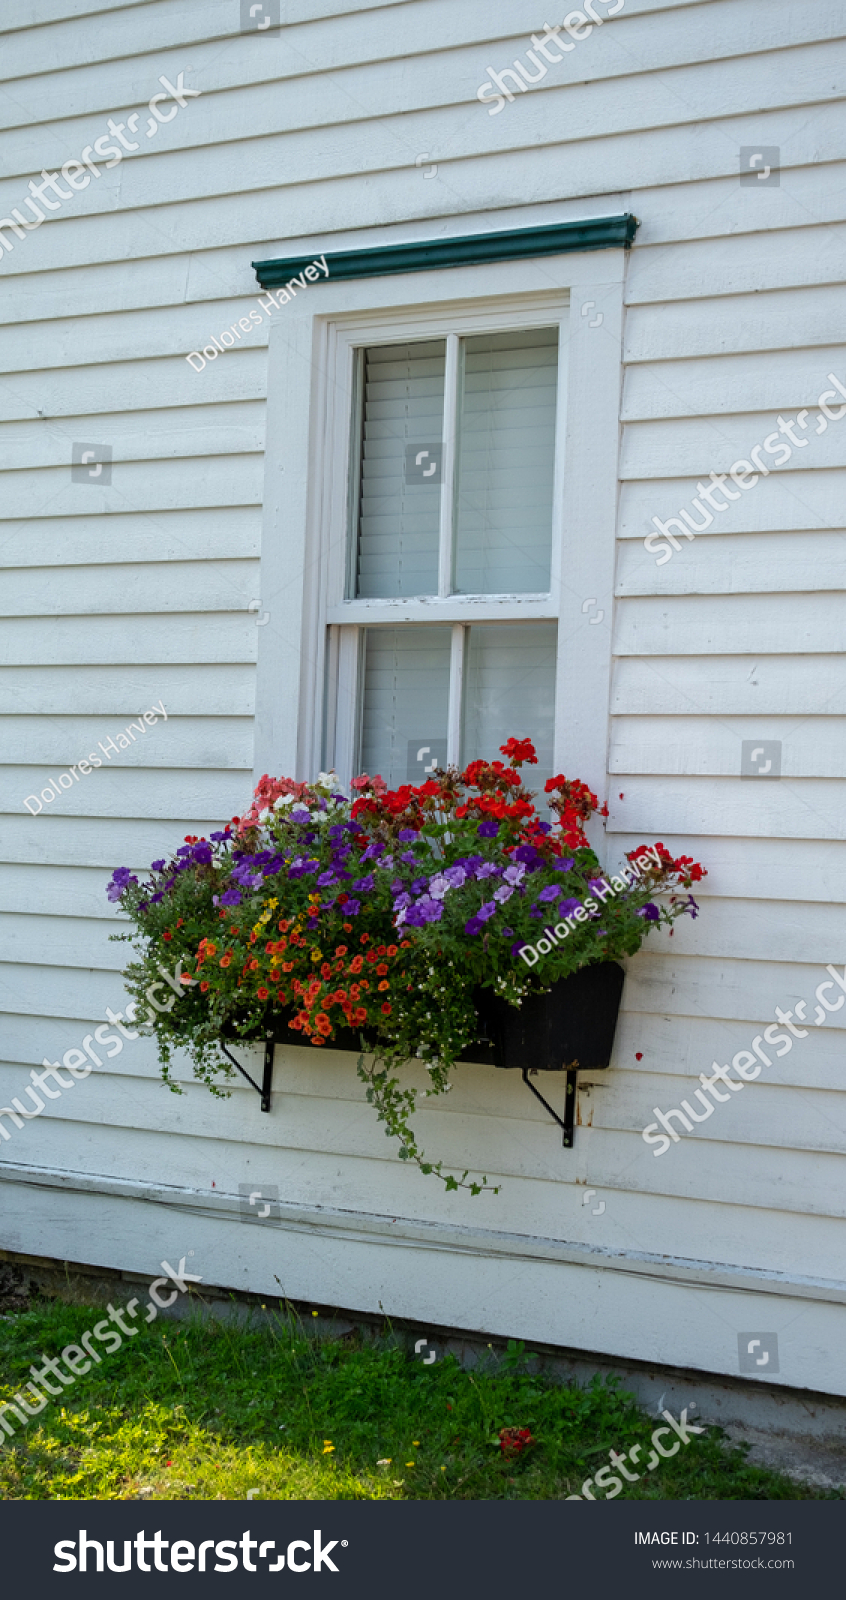 Download Flower Box Red Purple Yellow Blooming Nature Stock Image 1440857981 Yellowimages Mockups